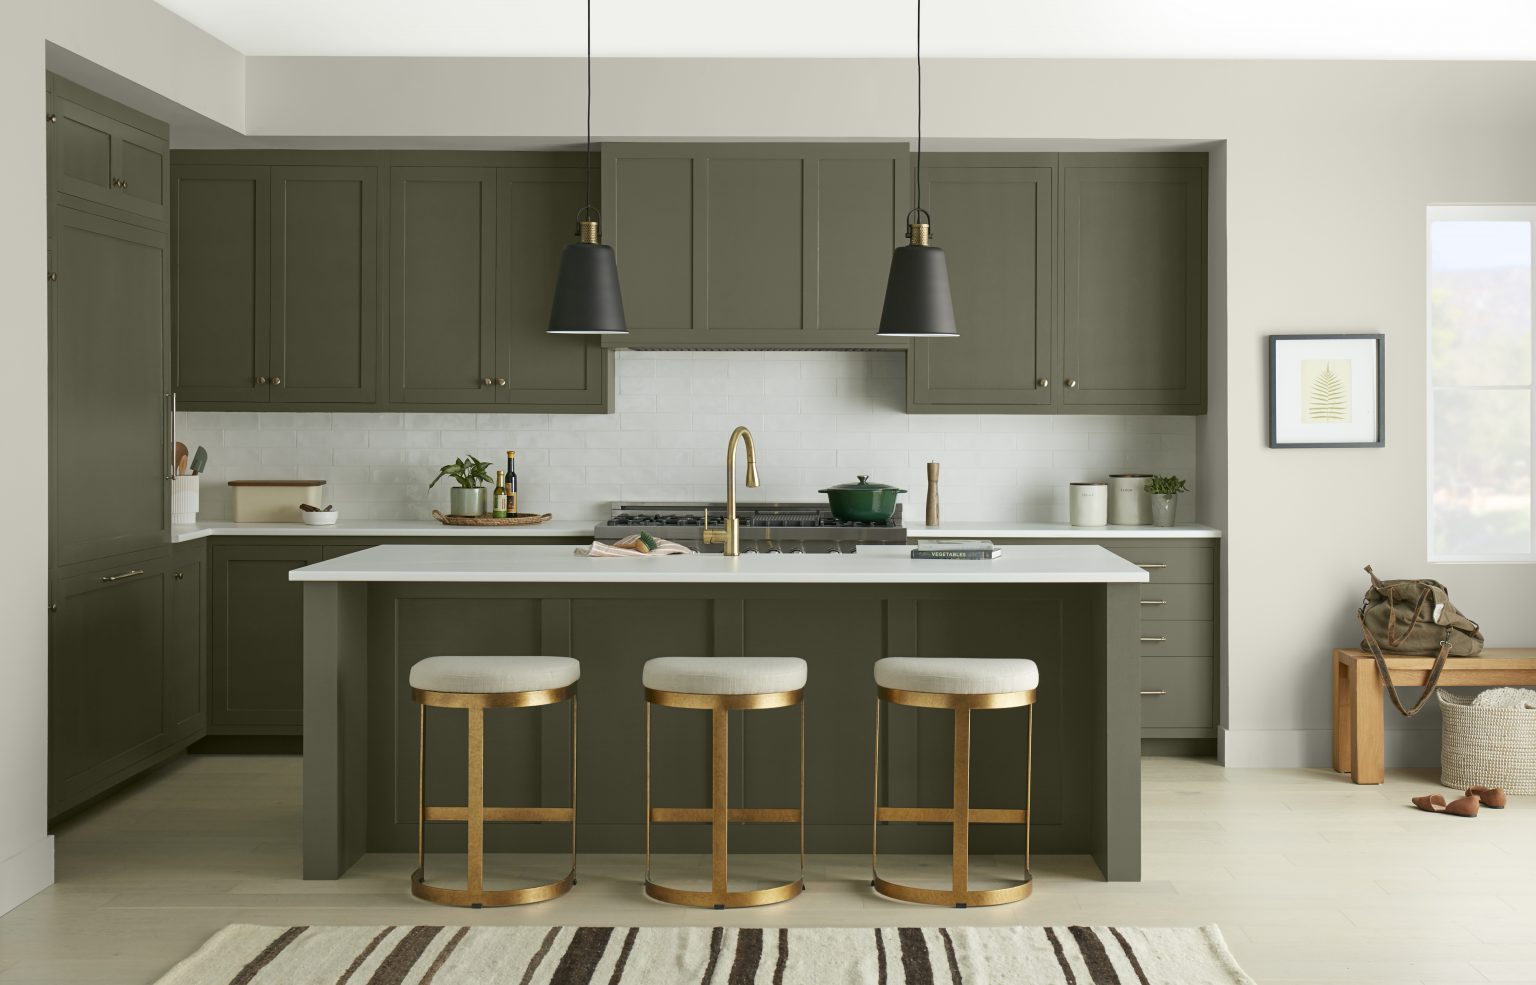 A modern kitchen with dark olive green cabinetry and a matching island, with hardware and kitchen bar stools in gold to match